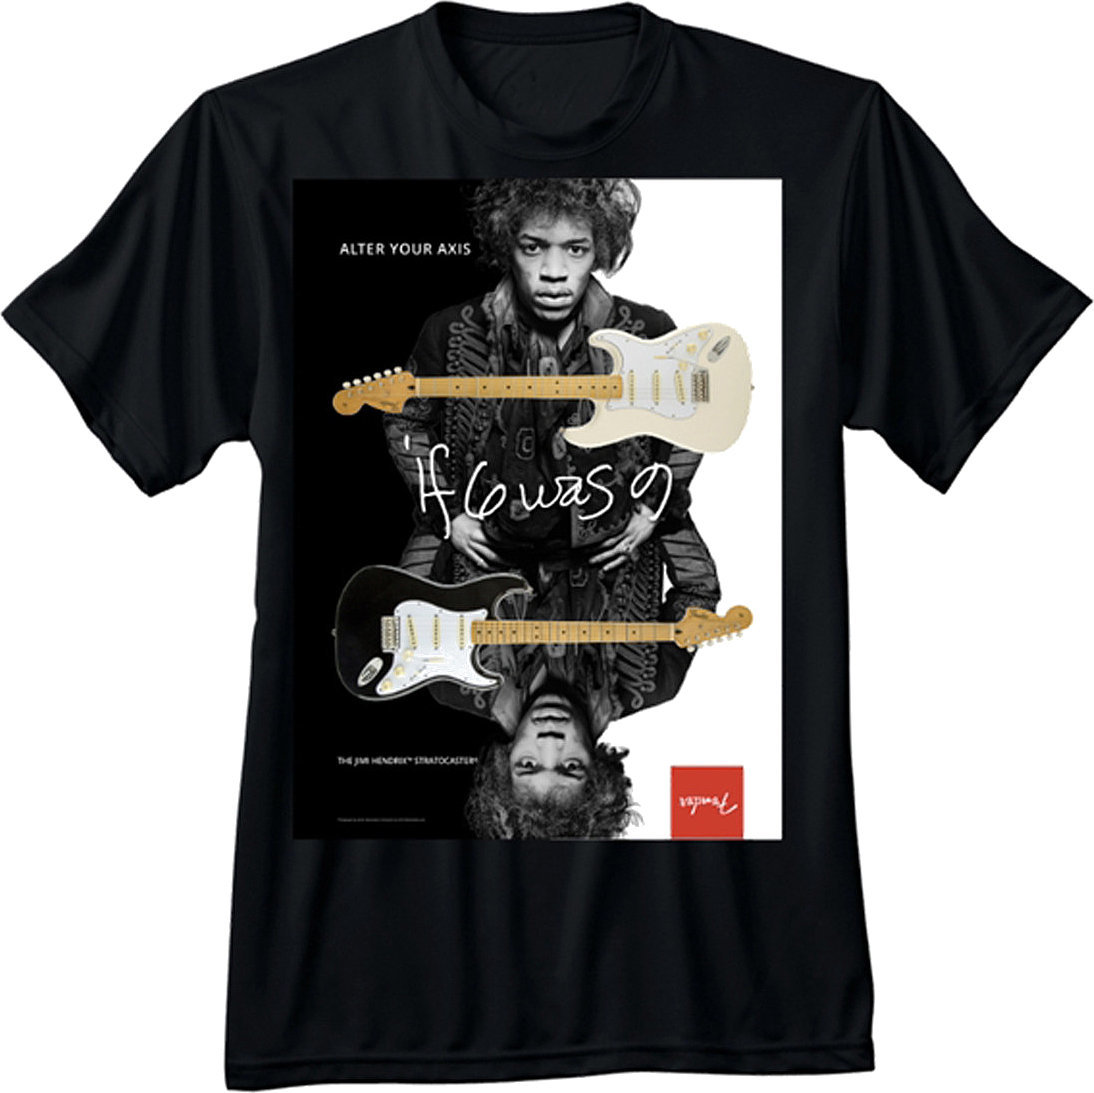 T-Shirt Fender Jimi Hendrix Collection Alter Your Axis T-Shirt Black M